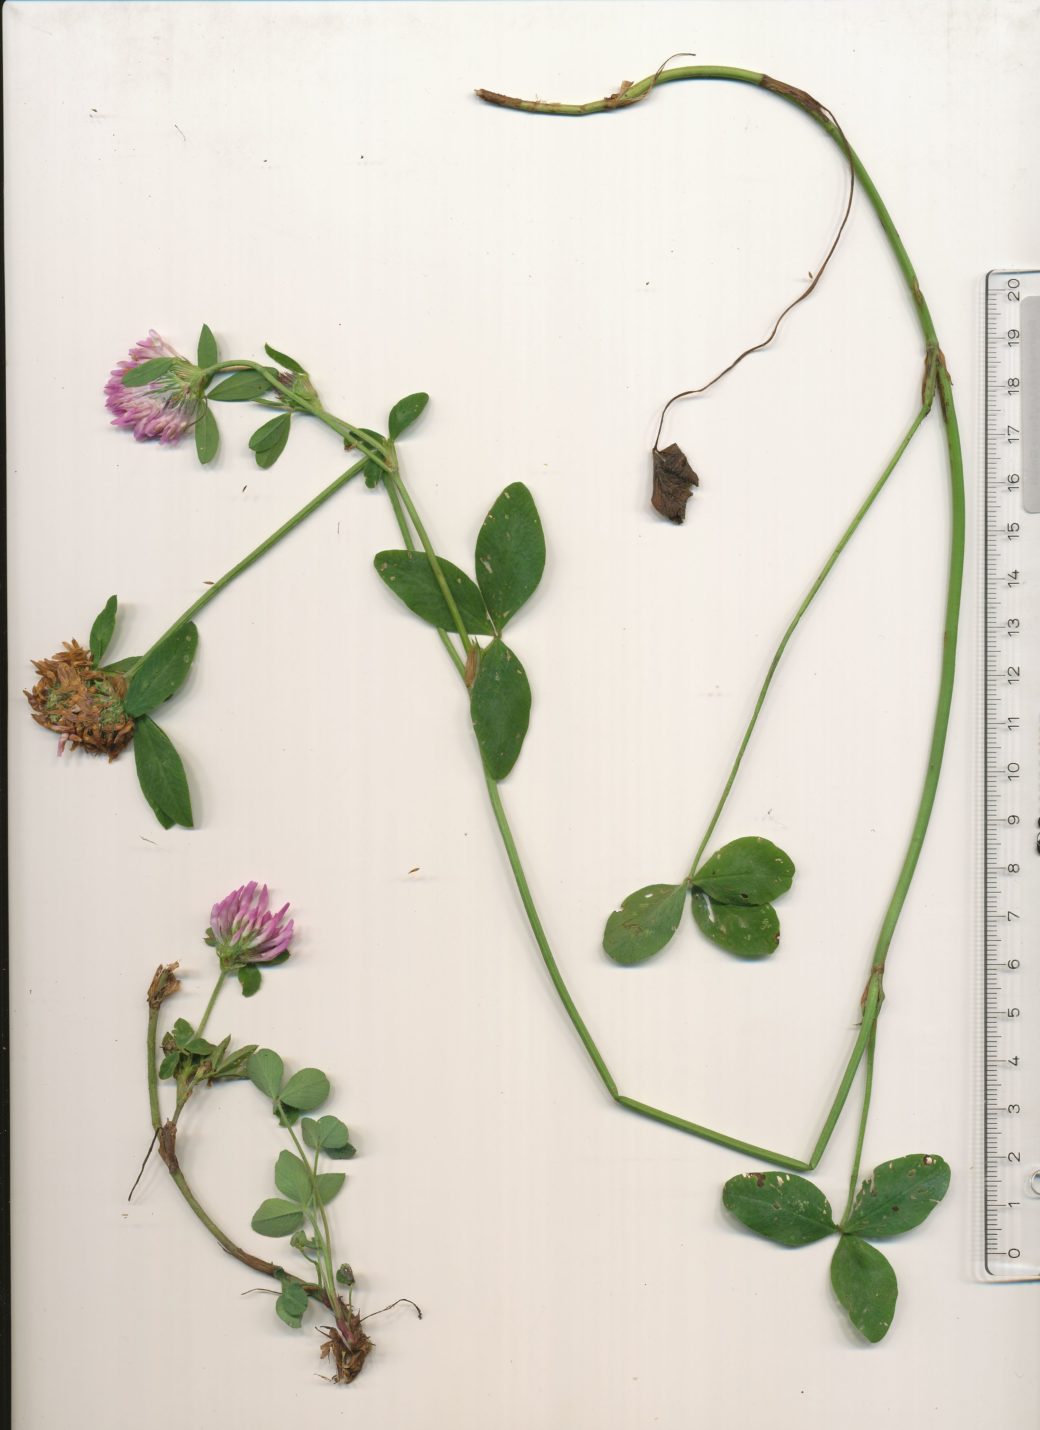 Picture: The photo shows a spread out plant body of a specimen of meadow clover, Latin Trifolium pratense, on a white base. A folding rule lies to the right of the plant.